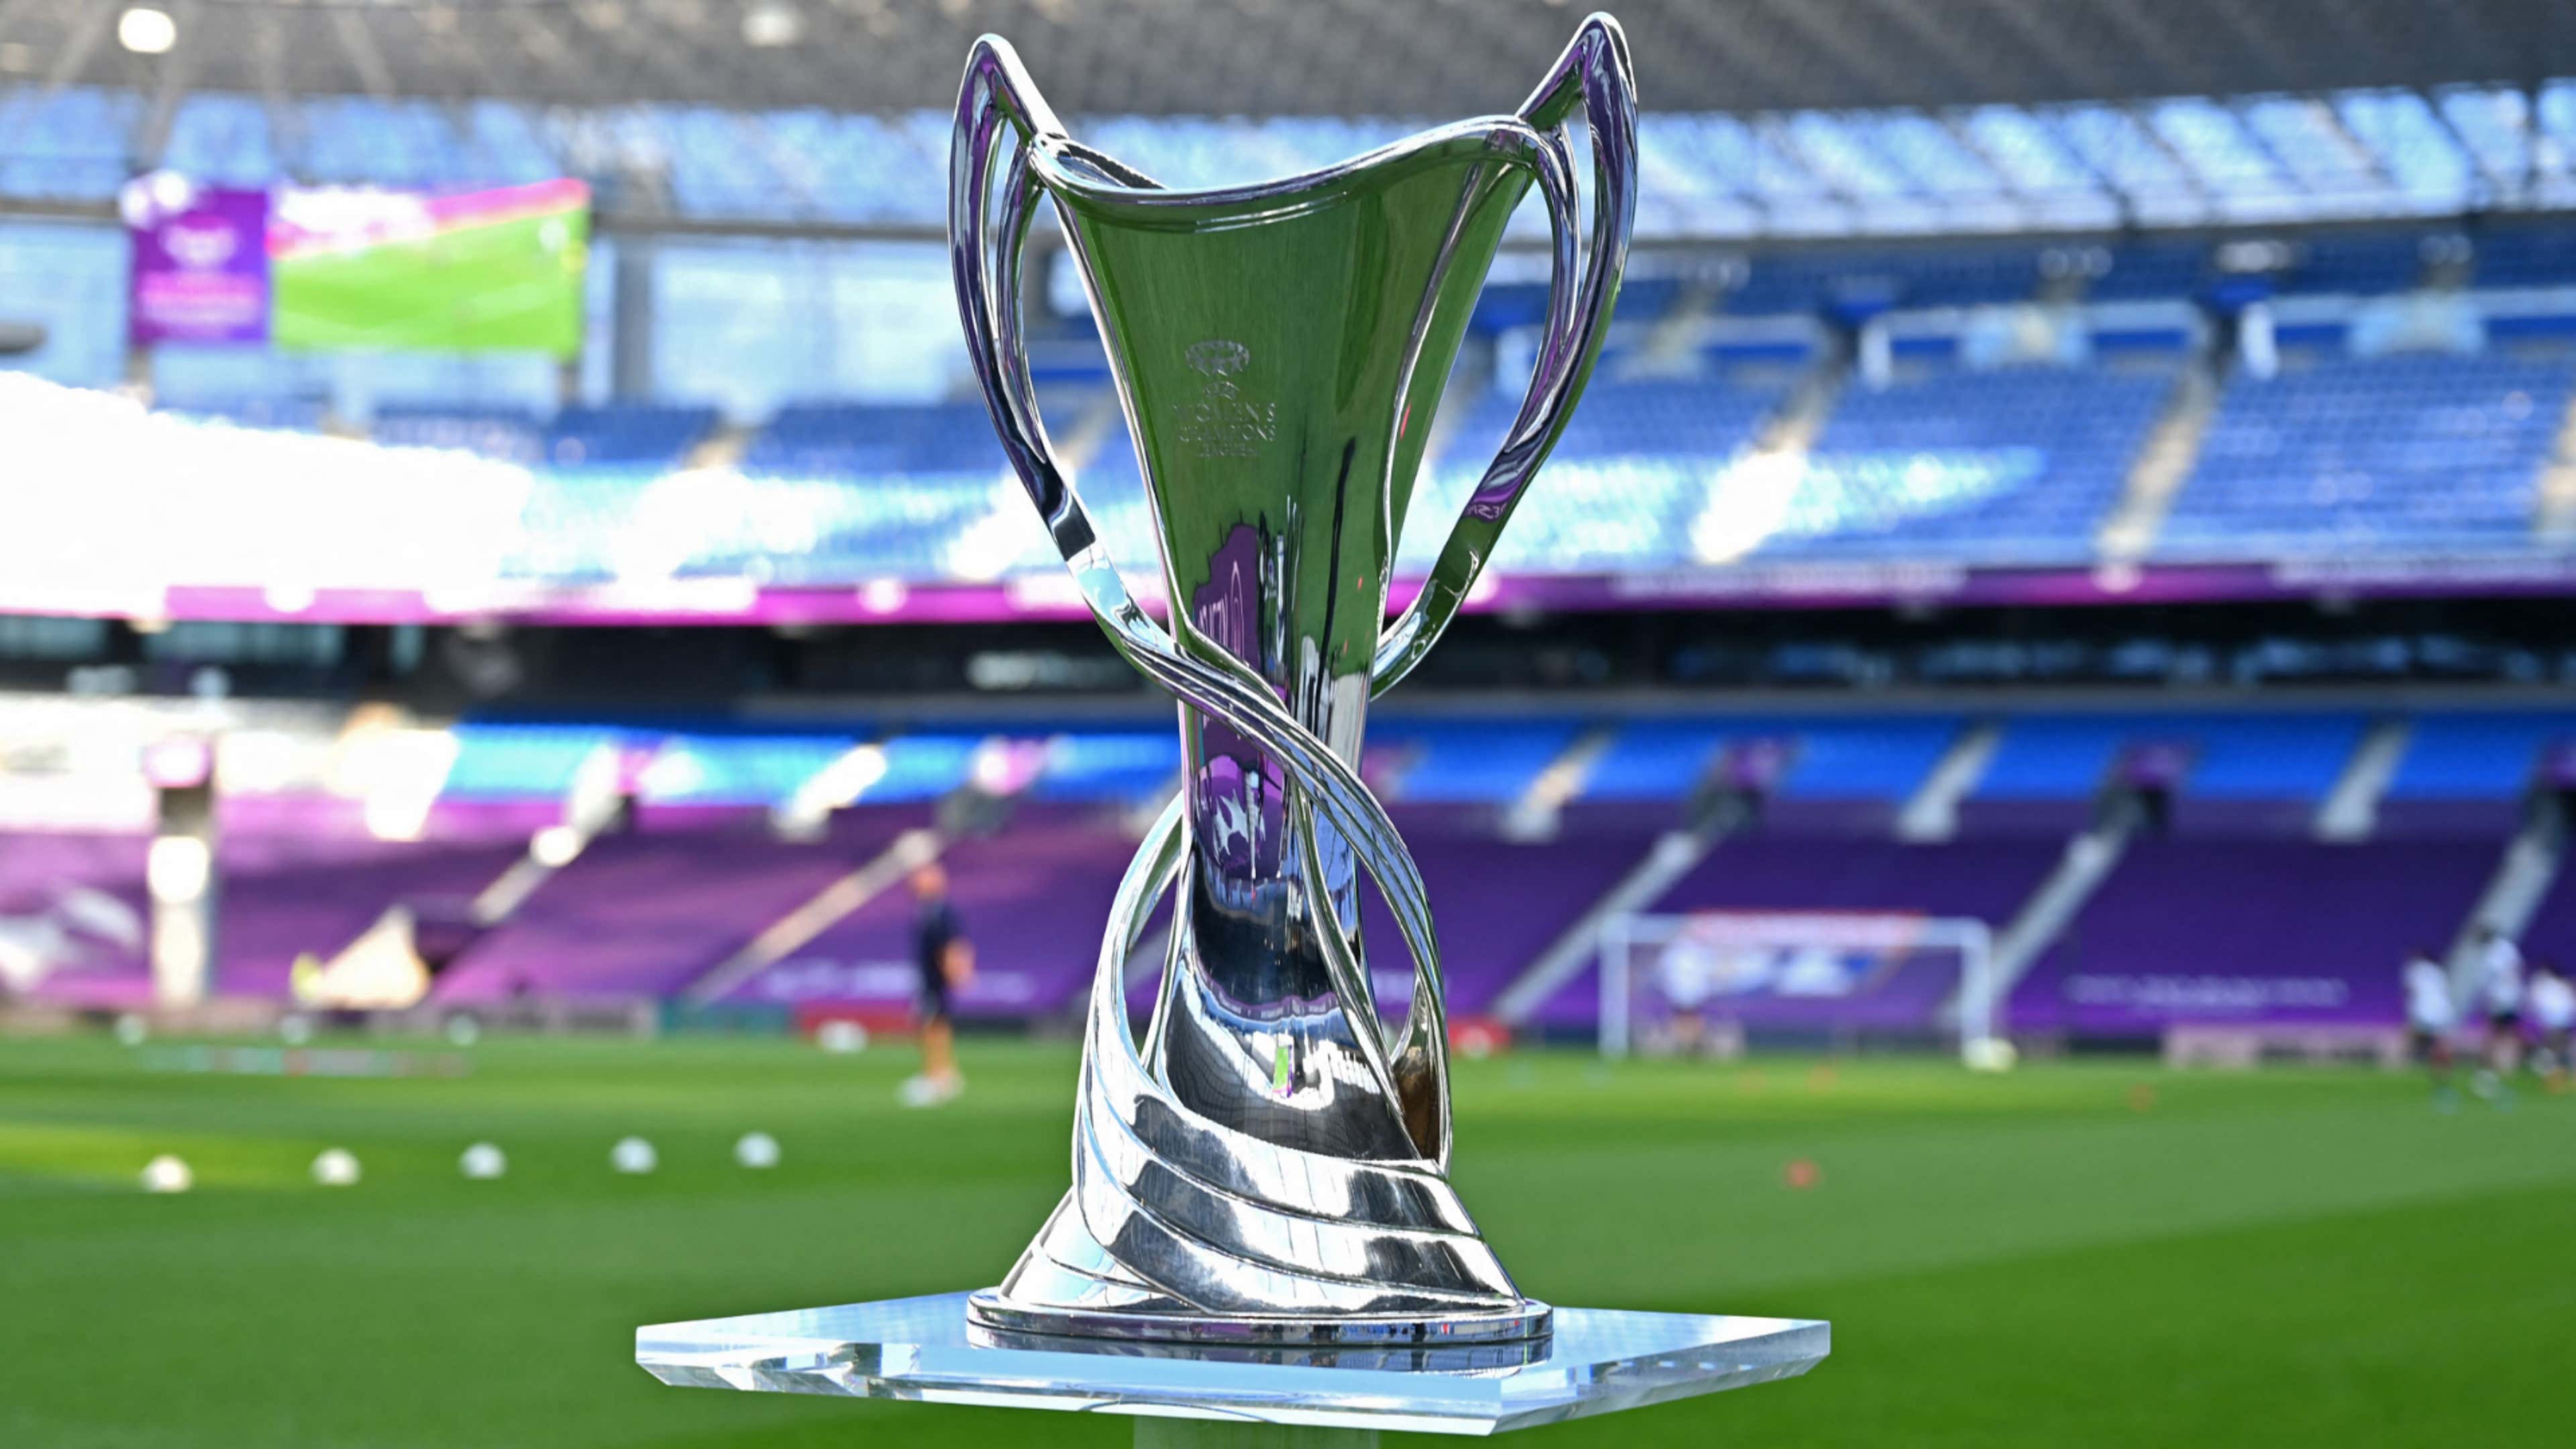 UEFA Champions League Schedule: Watch Live Matches On Paramount+